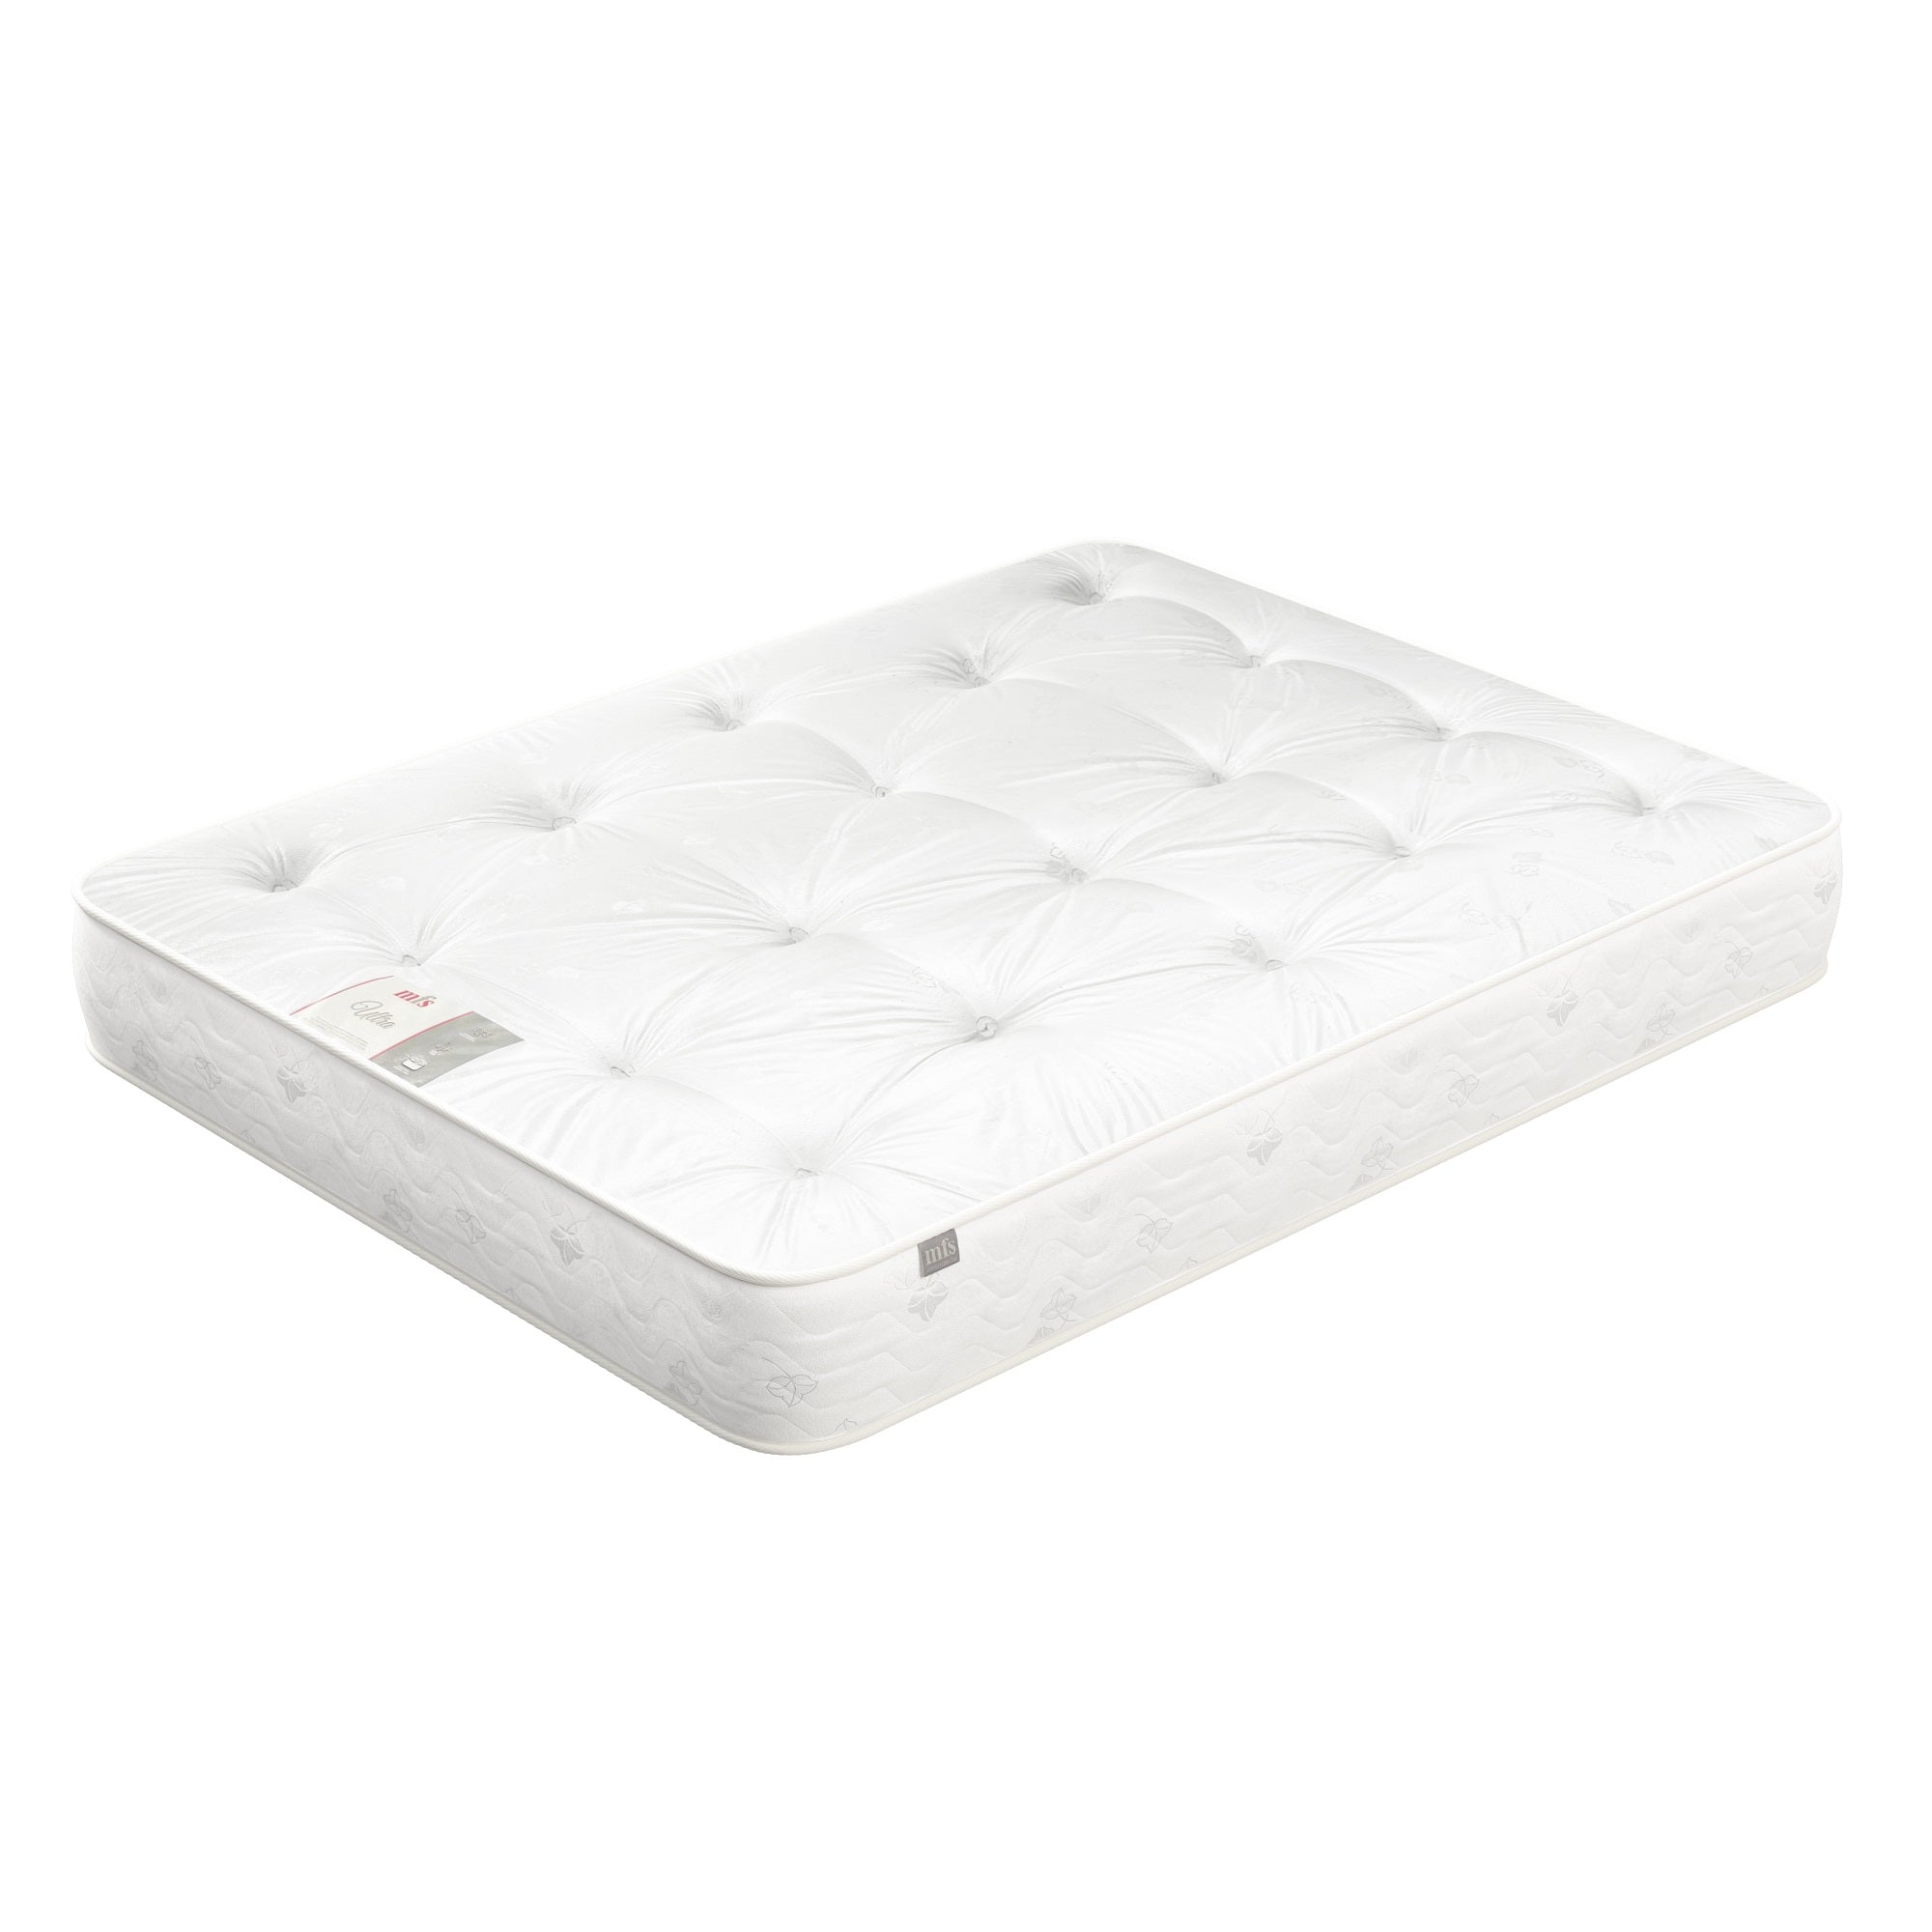 Ultra Orthopaedic Budget Mattress For MFS Products